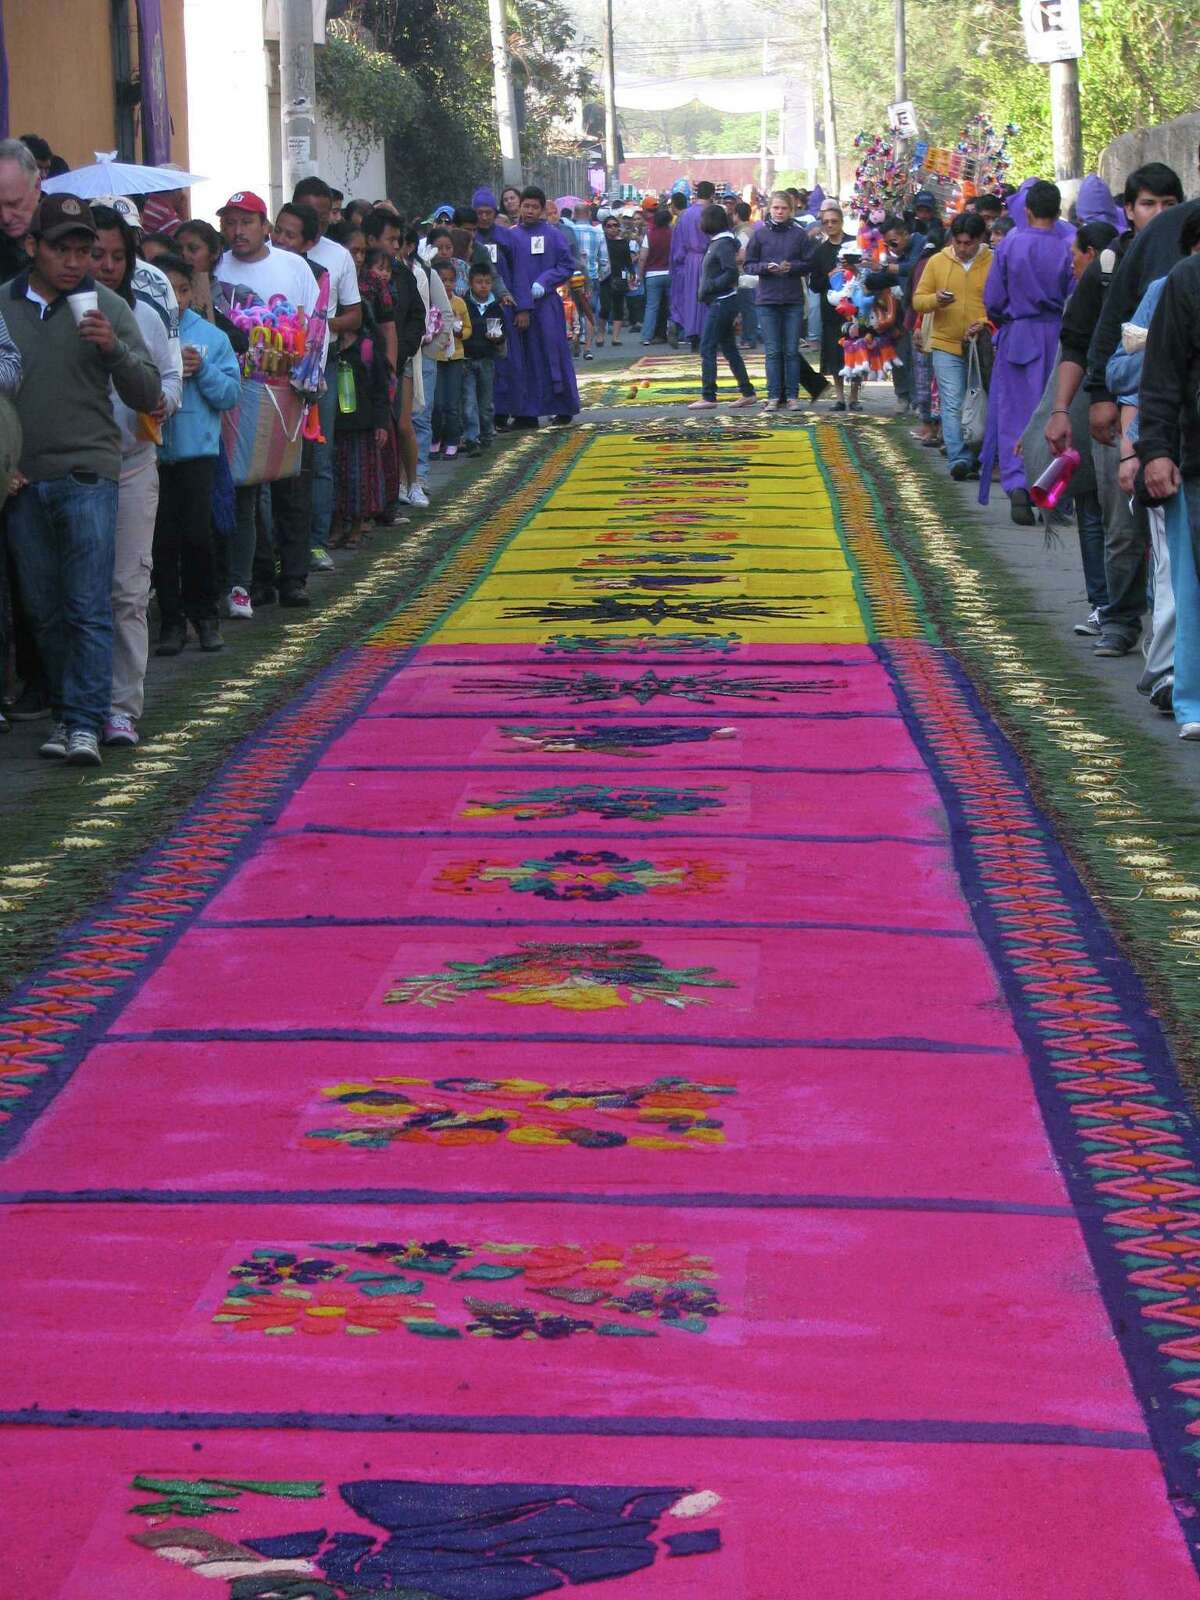 A block-long, intricately designed carpet made of colored sawdust ﻿﻿covers the route where religious processions pass during the Easter season.﻿